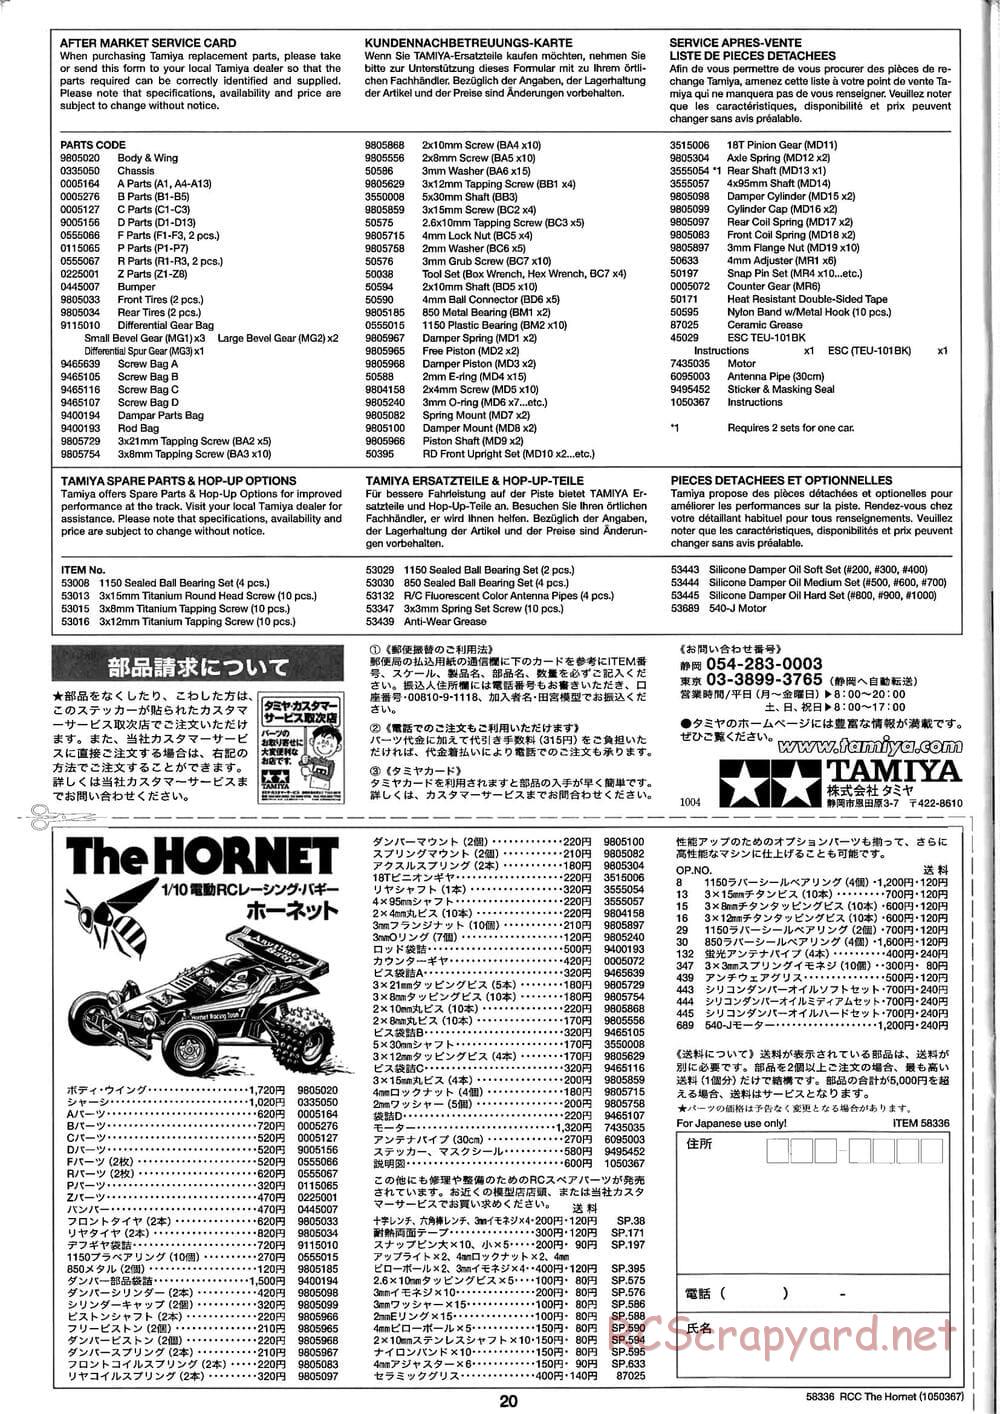 Tamiya - The Hornet (2004) - GH Chassis - Manual - Page 20